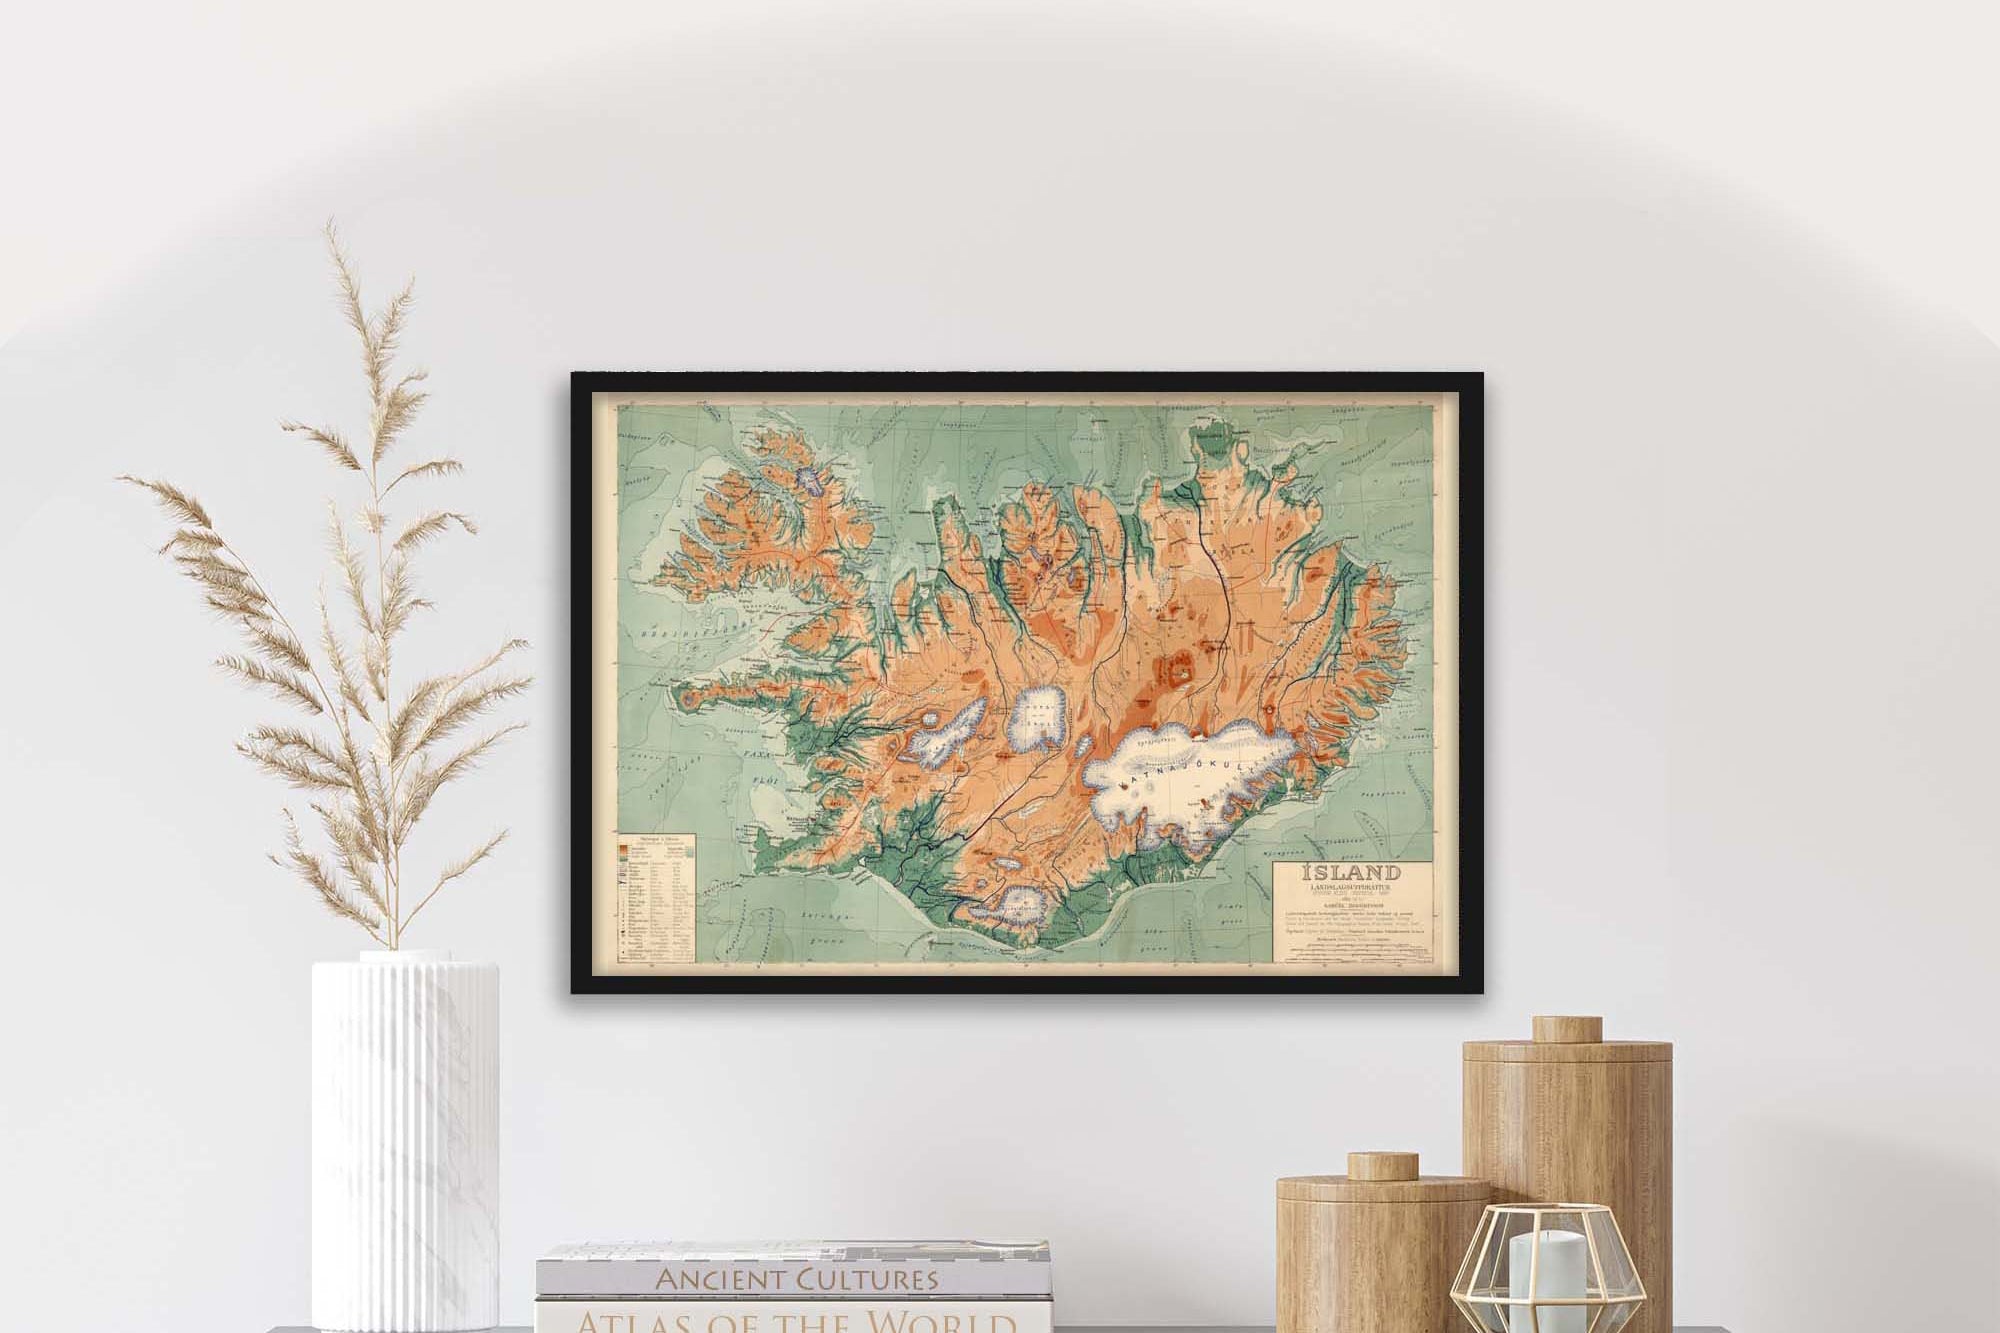 Physical Map of Iceland